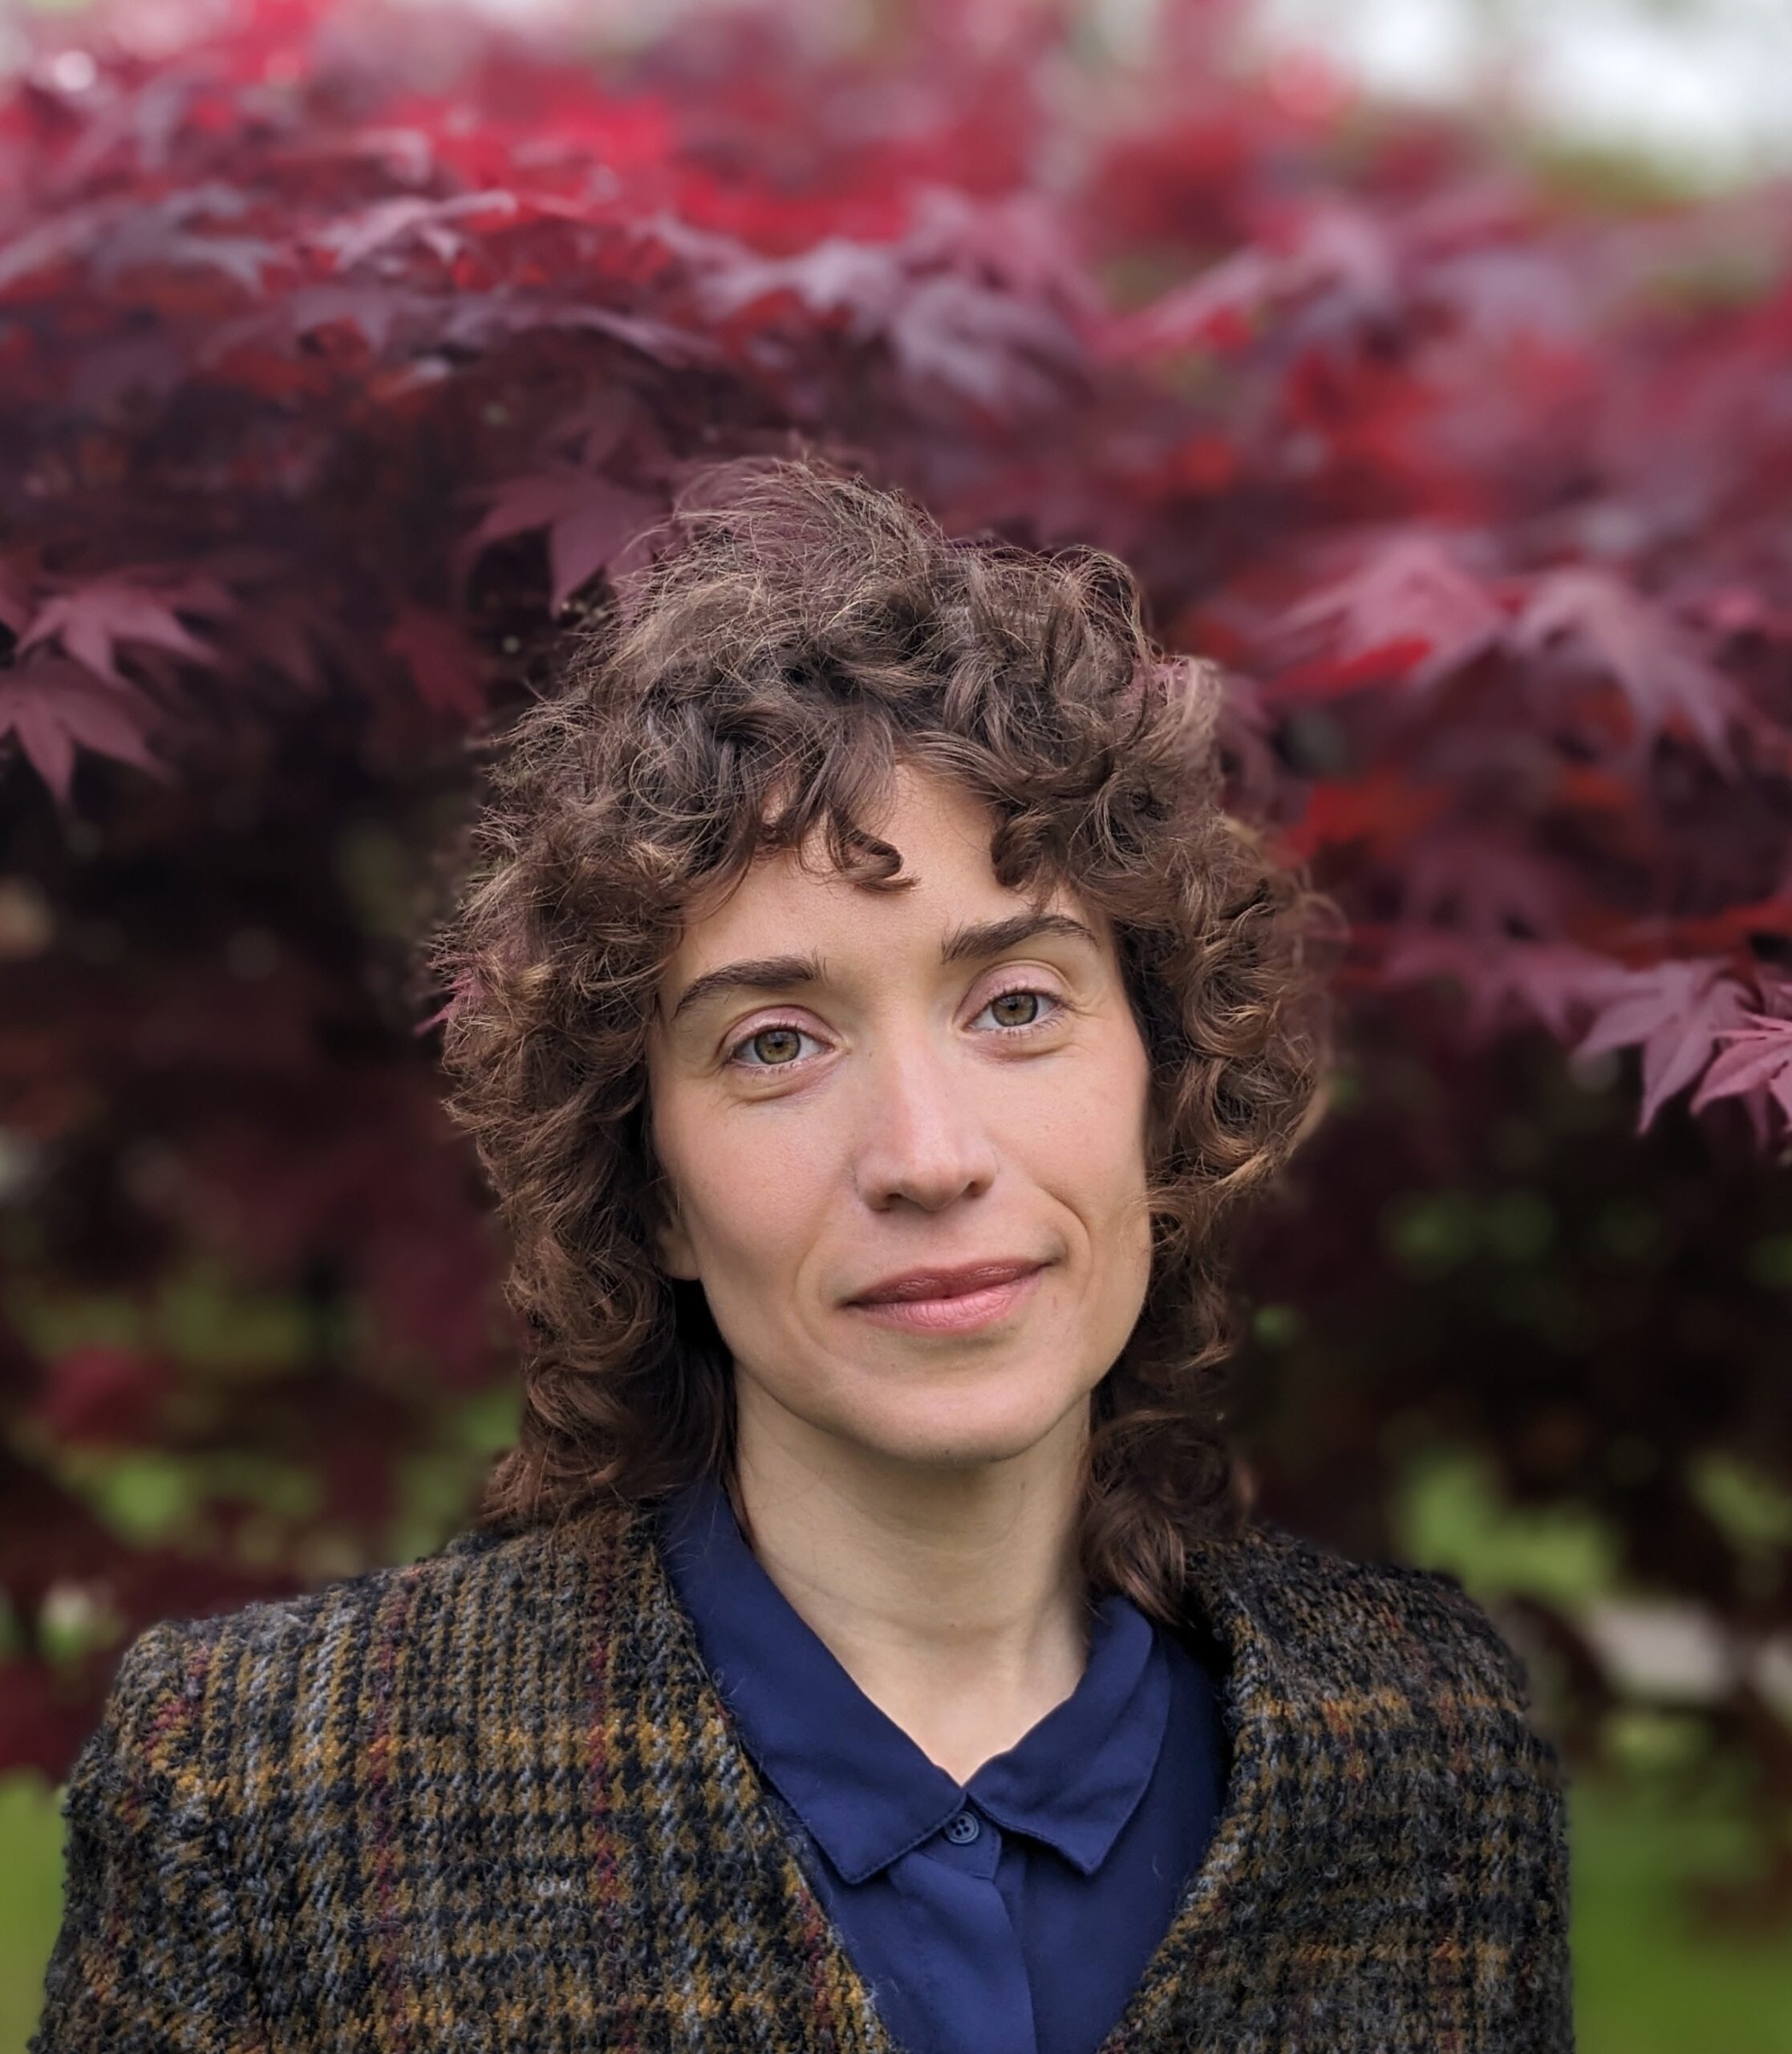 A calm Rabbi with curly hair stands in front of a tree with vibrant red leaves. Wearing a checked coat over a blue shirt, Ora Nitkin-Kaner commands attention as the background softly blurs around them.